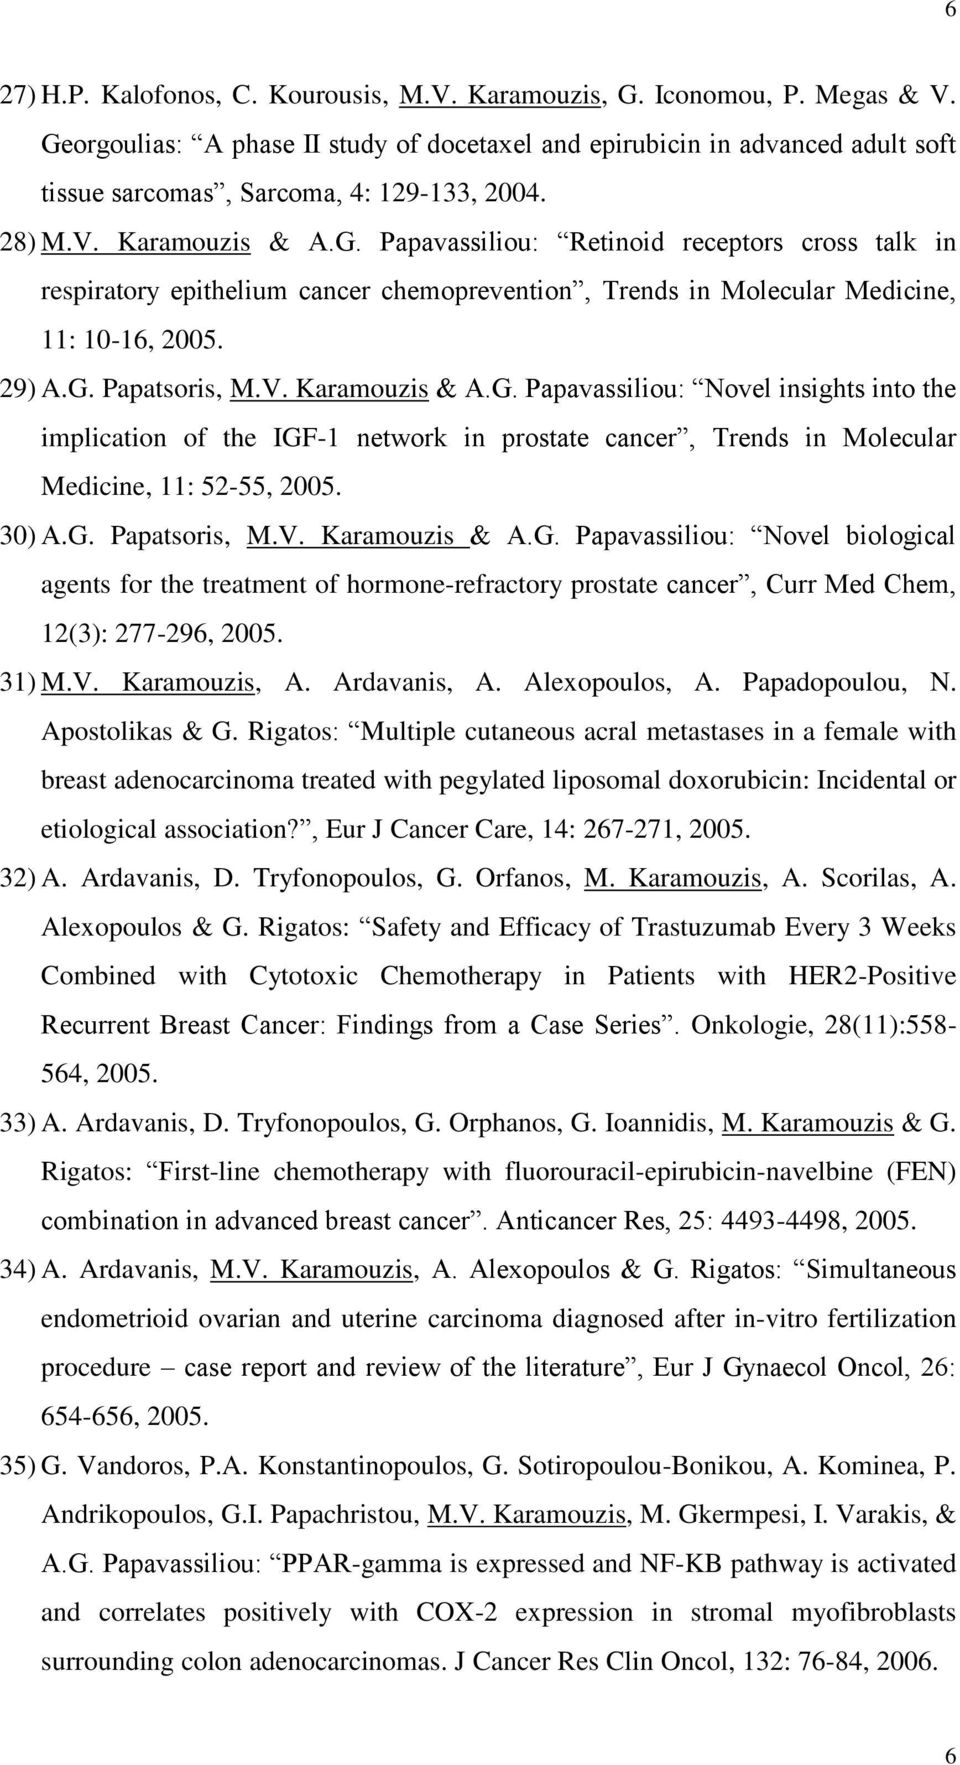 29) A.G. Papatsoris, M.V. Karamouzis & A.G. Papavassiliou: Novel insights into the implication of the IGF-1 network in prostate cancer, Trends in Molecular Medicine, 11: 52-55, 2005. 30) Α.G. Papatsoris, M.V. Karamouzis & A.G. Papavassiliou: Novel biological agents for the treatment of hormone-refractory prostate cancer, Curr Med Chem, 12(3): 277-296, 2005.